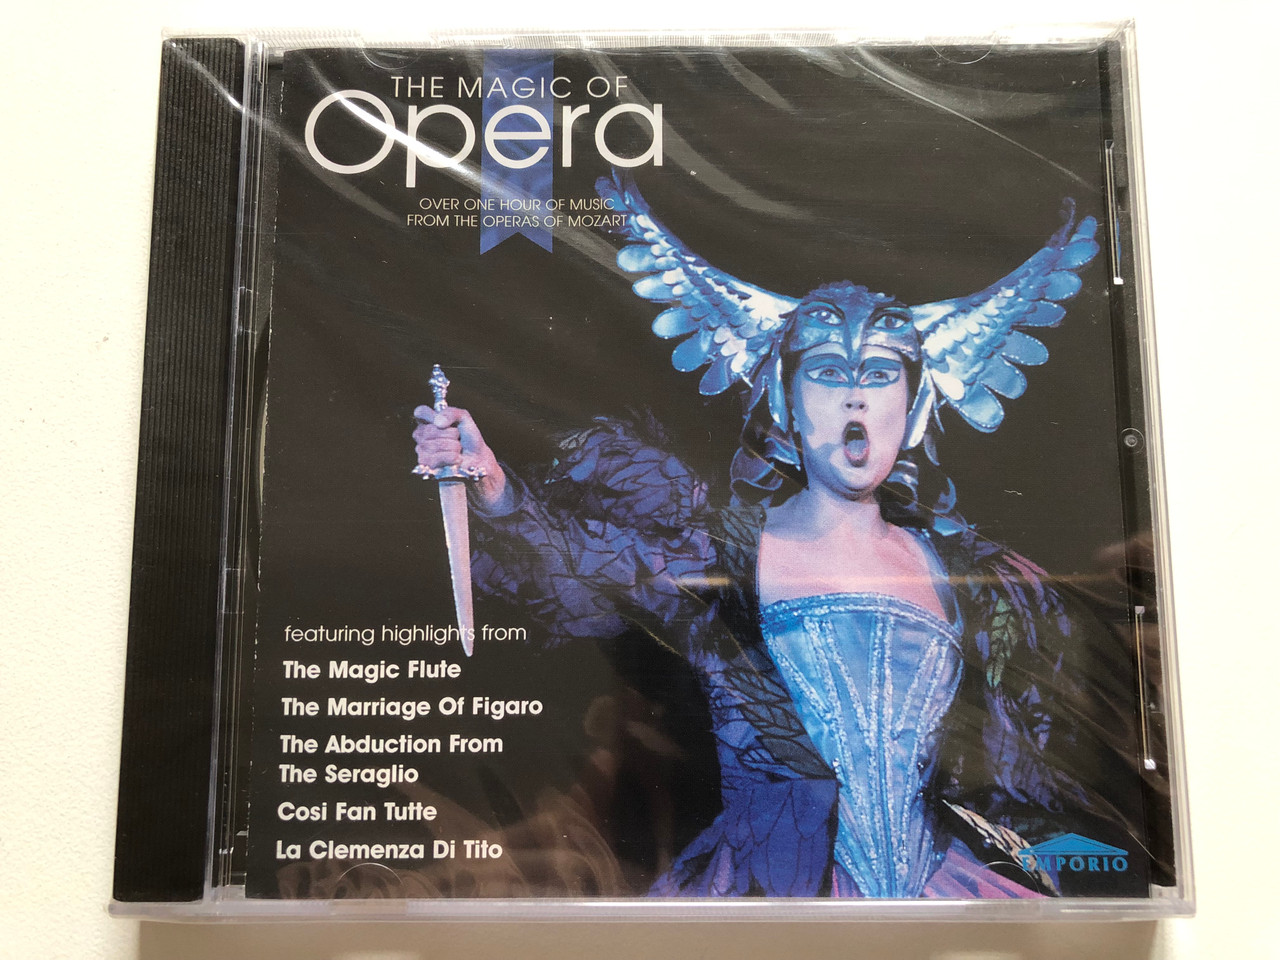 https://cdn10.bigcommerce.com/s-62bdpkt7pb/products/0/images/306117/The_Magic_Of_Opera_Over_One_Hour_Of_Music_From_The_Operas_Of_Mozart_-_Featuring_highlights_from_The_Magic_Flute_The_Marriage_Of_Figaro_The_Abduction_From_The_Seraglio_Cosi_Fan_Tutte_La_1__11377.1698155516.1280.1280.JPG?c=2